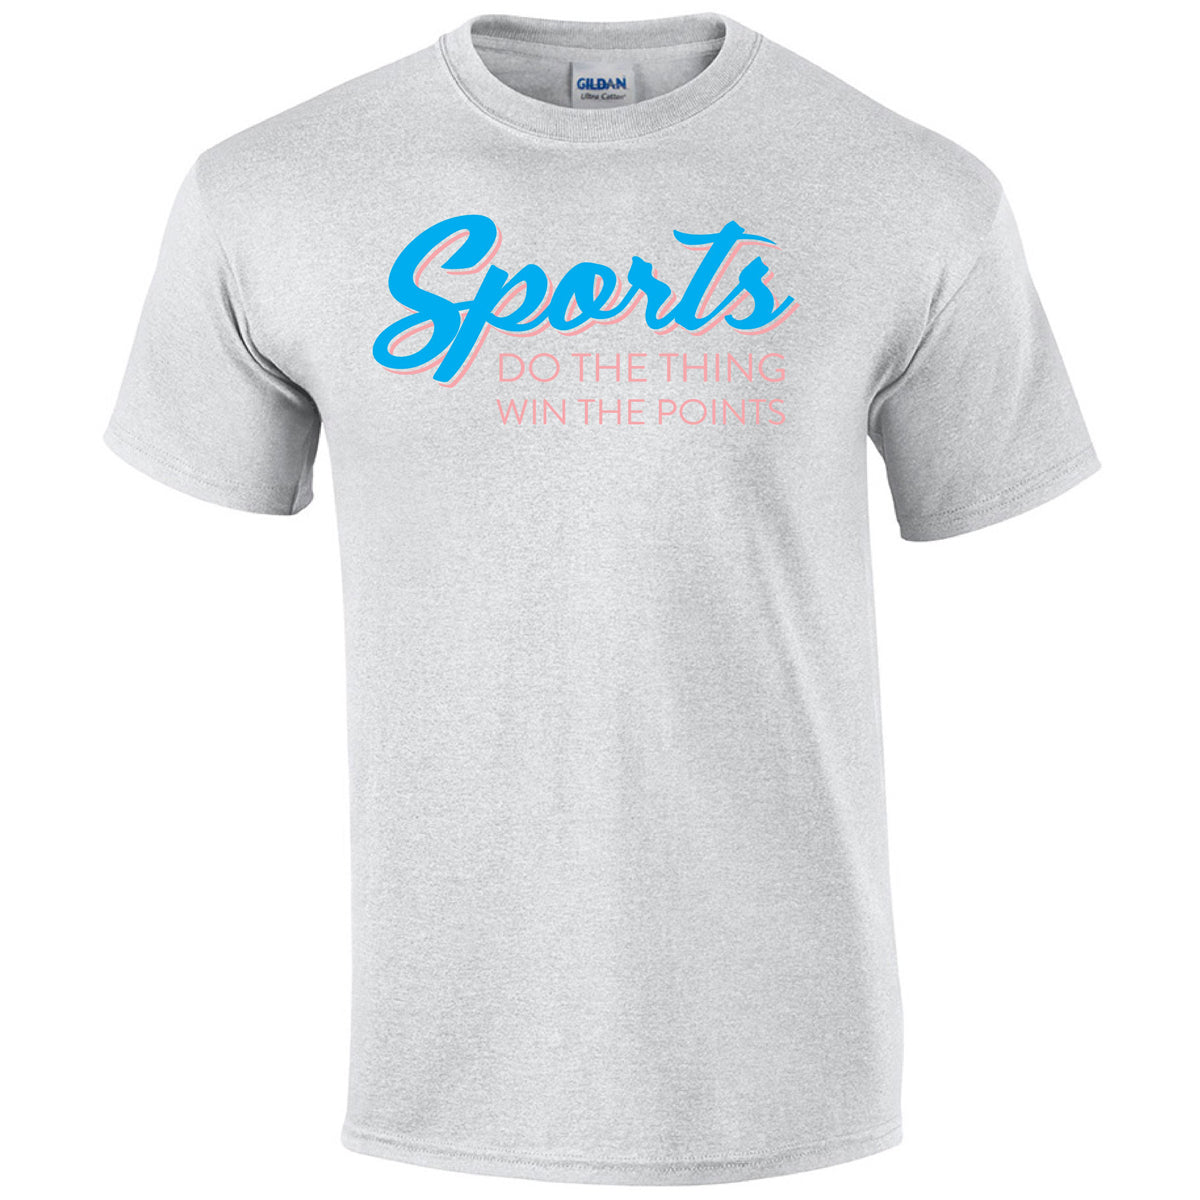 Sports: Do The Thing Win The Points Printed Tee Humorous Shirt 411 Youth Medium Ash Youth